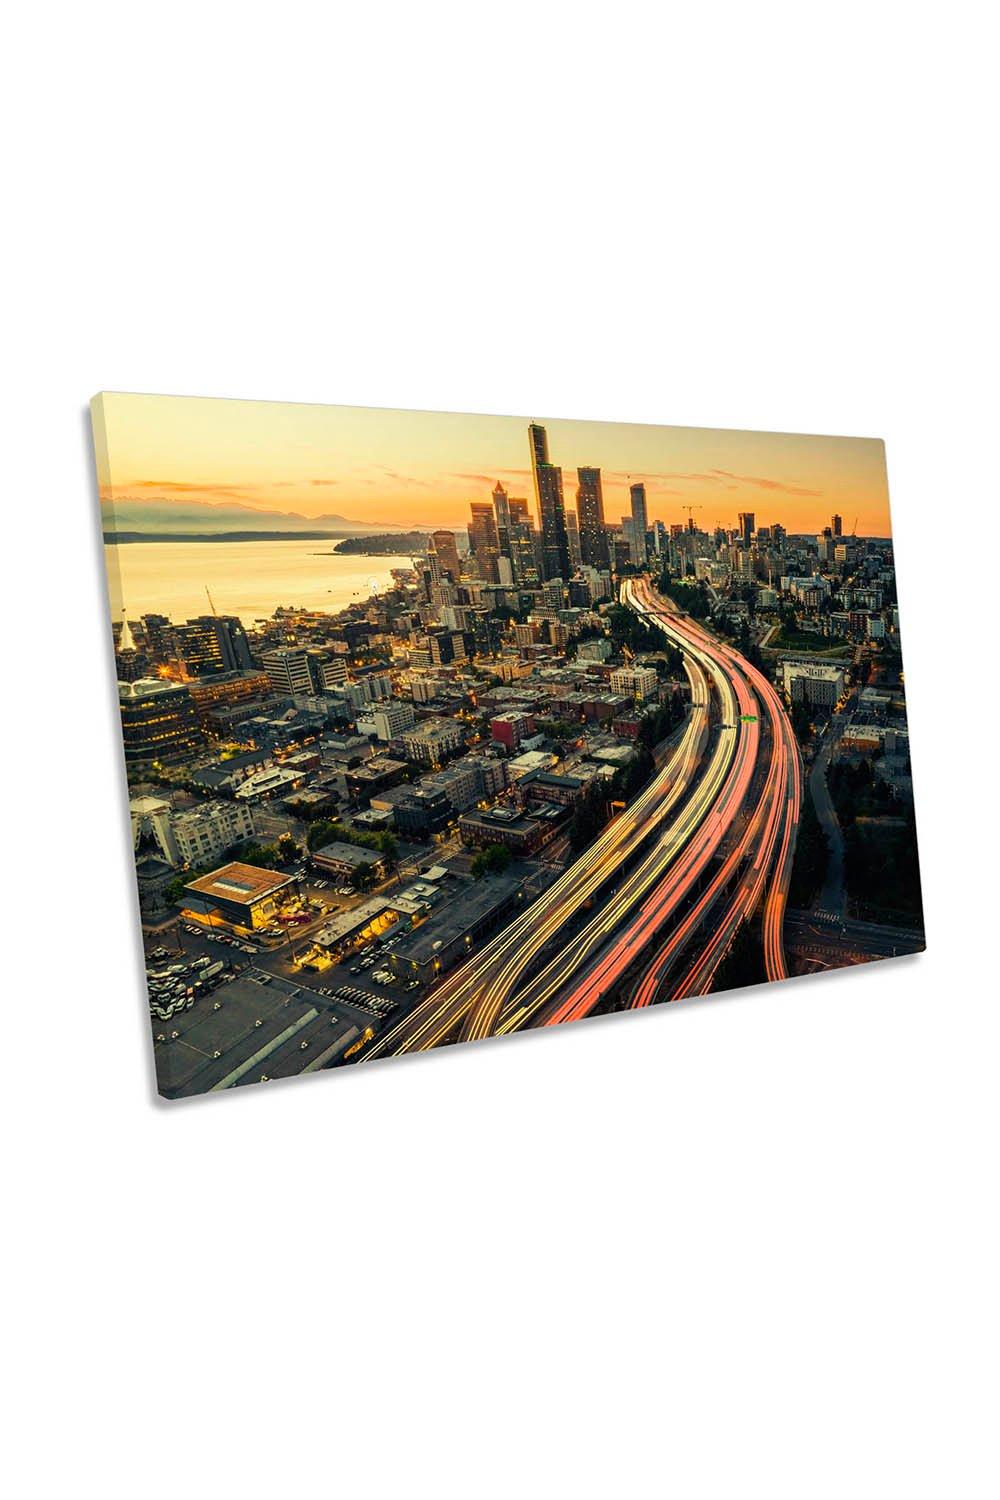 Way to Seattle City Skyline Sunset Canvas Wall Art Picture Print